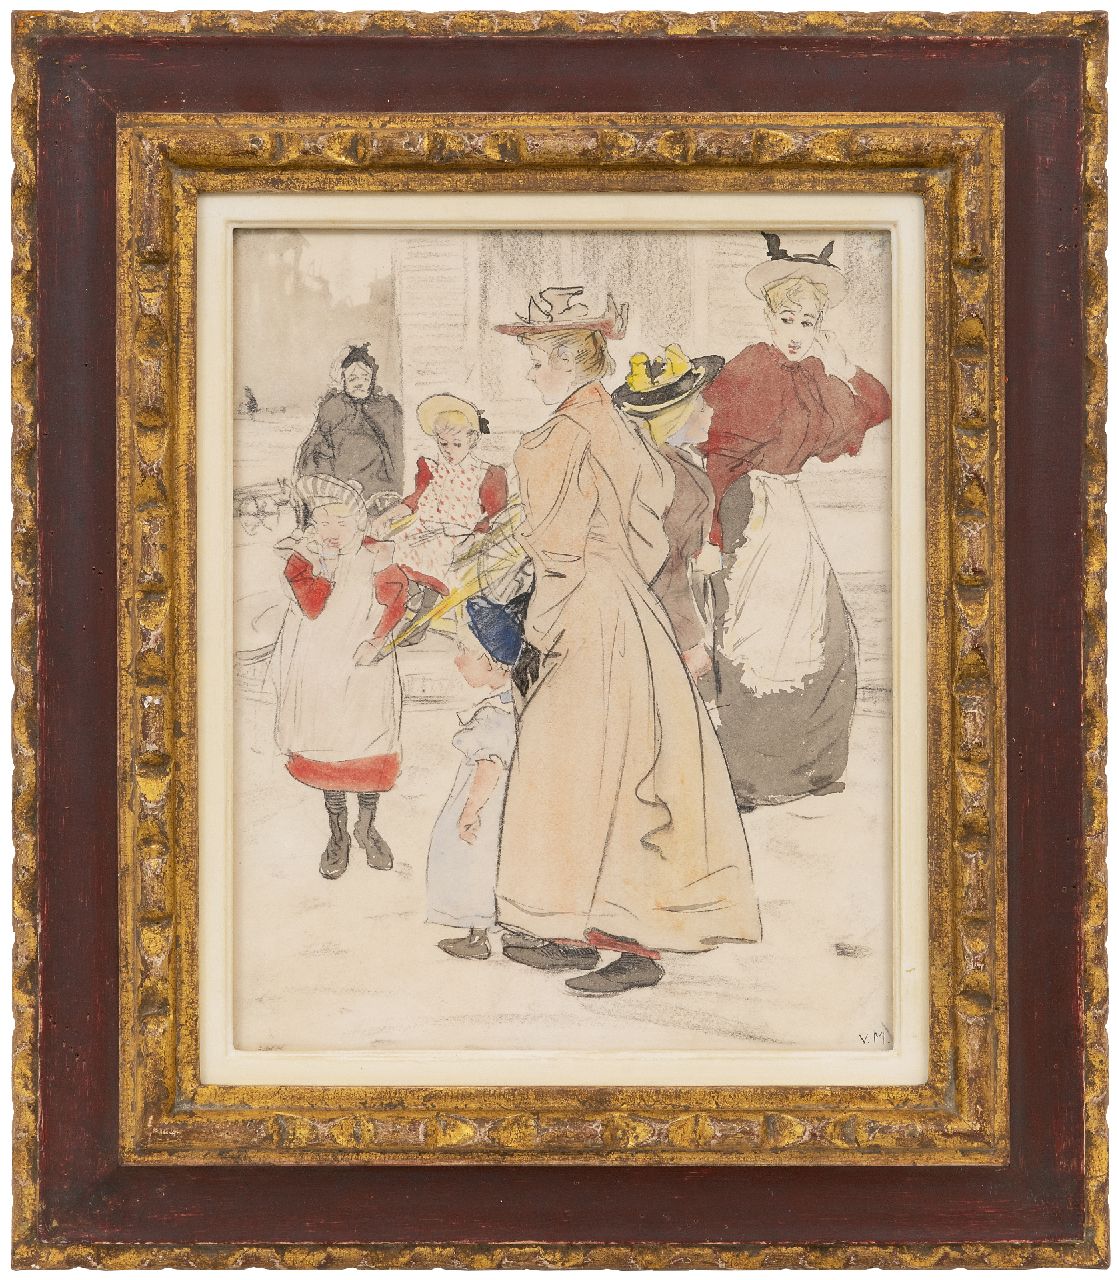 Vaarzon Morel W.F.A.I.  | Wilhelm Ferdinand Abraham Isaac 'Willem' Vaarzon Morel | Watercolours and drawings offered for sale | The encounter, chalk and watercolour on paper 28.5 x 32.3 cm, signed l.r. with initials